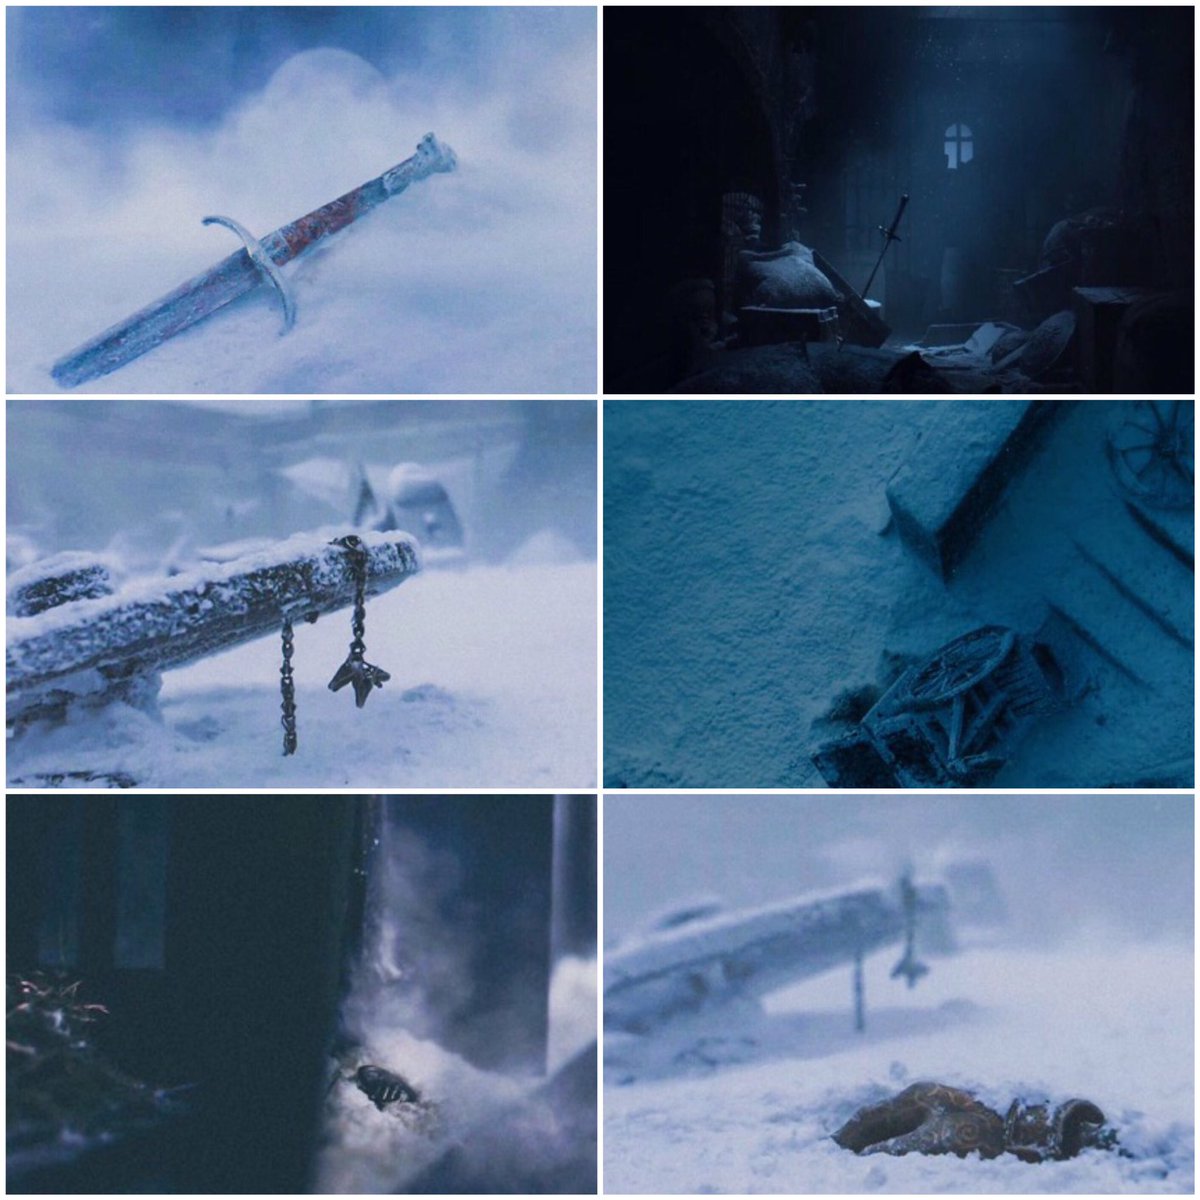 Aftermath of the Battle of Winterfell